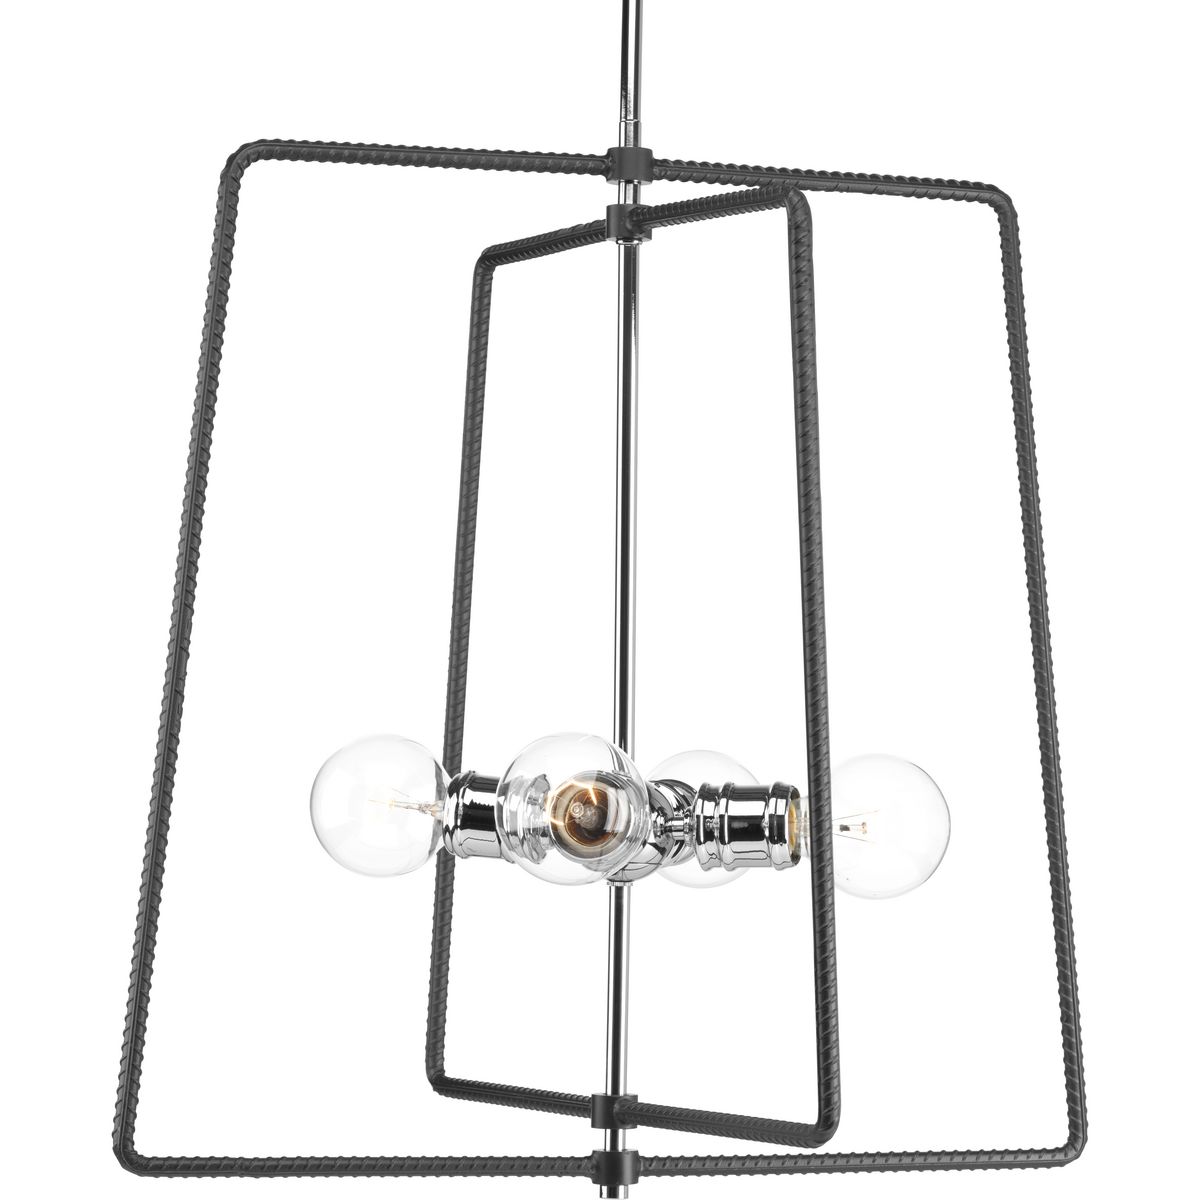 The Re-Bar four-light pendant is inspired by industrial and vintage electric elements, created from a common masonry structure - a steel reinforcing bar. The coarse material is paired with bright Chrome to provide an intriguing visual contrast. In addition to Urban Industrial and Vintage Electric styles, Re-Bar is ideal for updating Modern Farmhouse interiors.